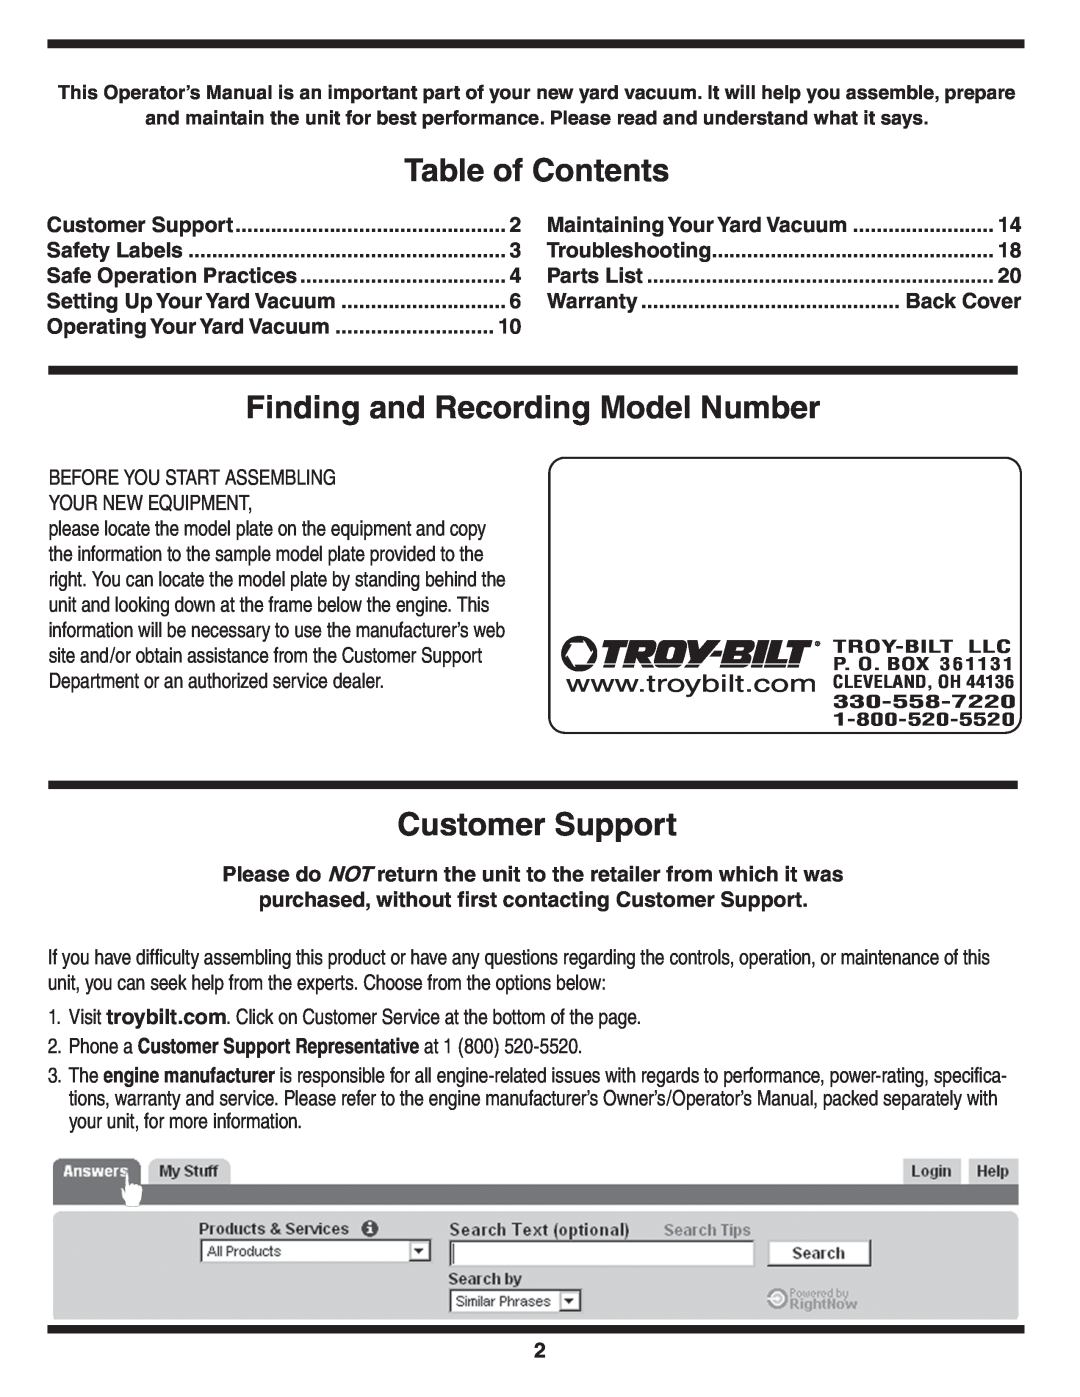 Troy-Bilt 24A-070F768 warranty Table of Contents, Finding and Recording Model Number, Customer Support 